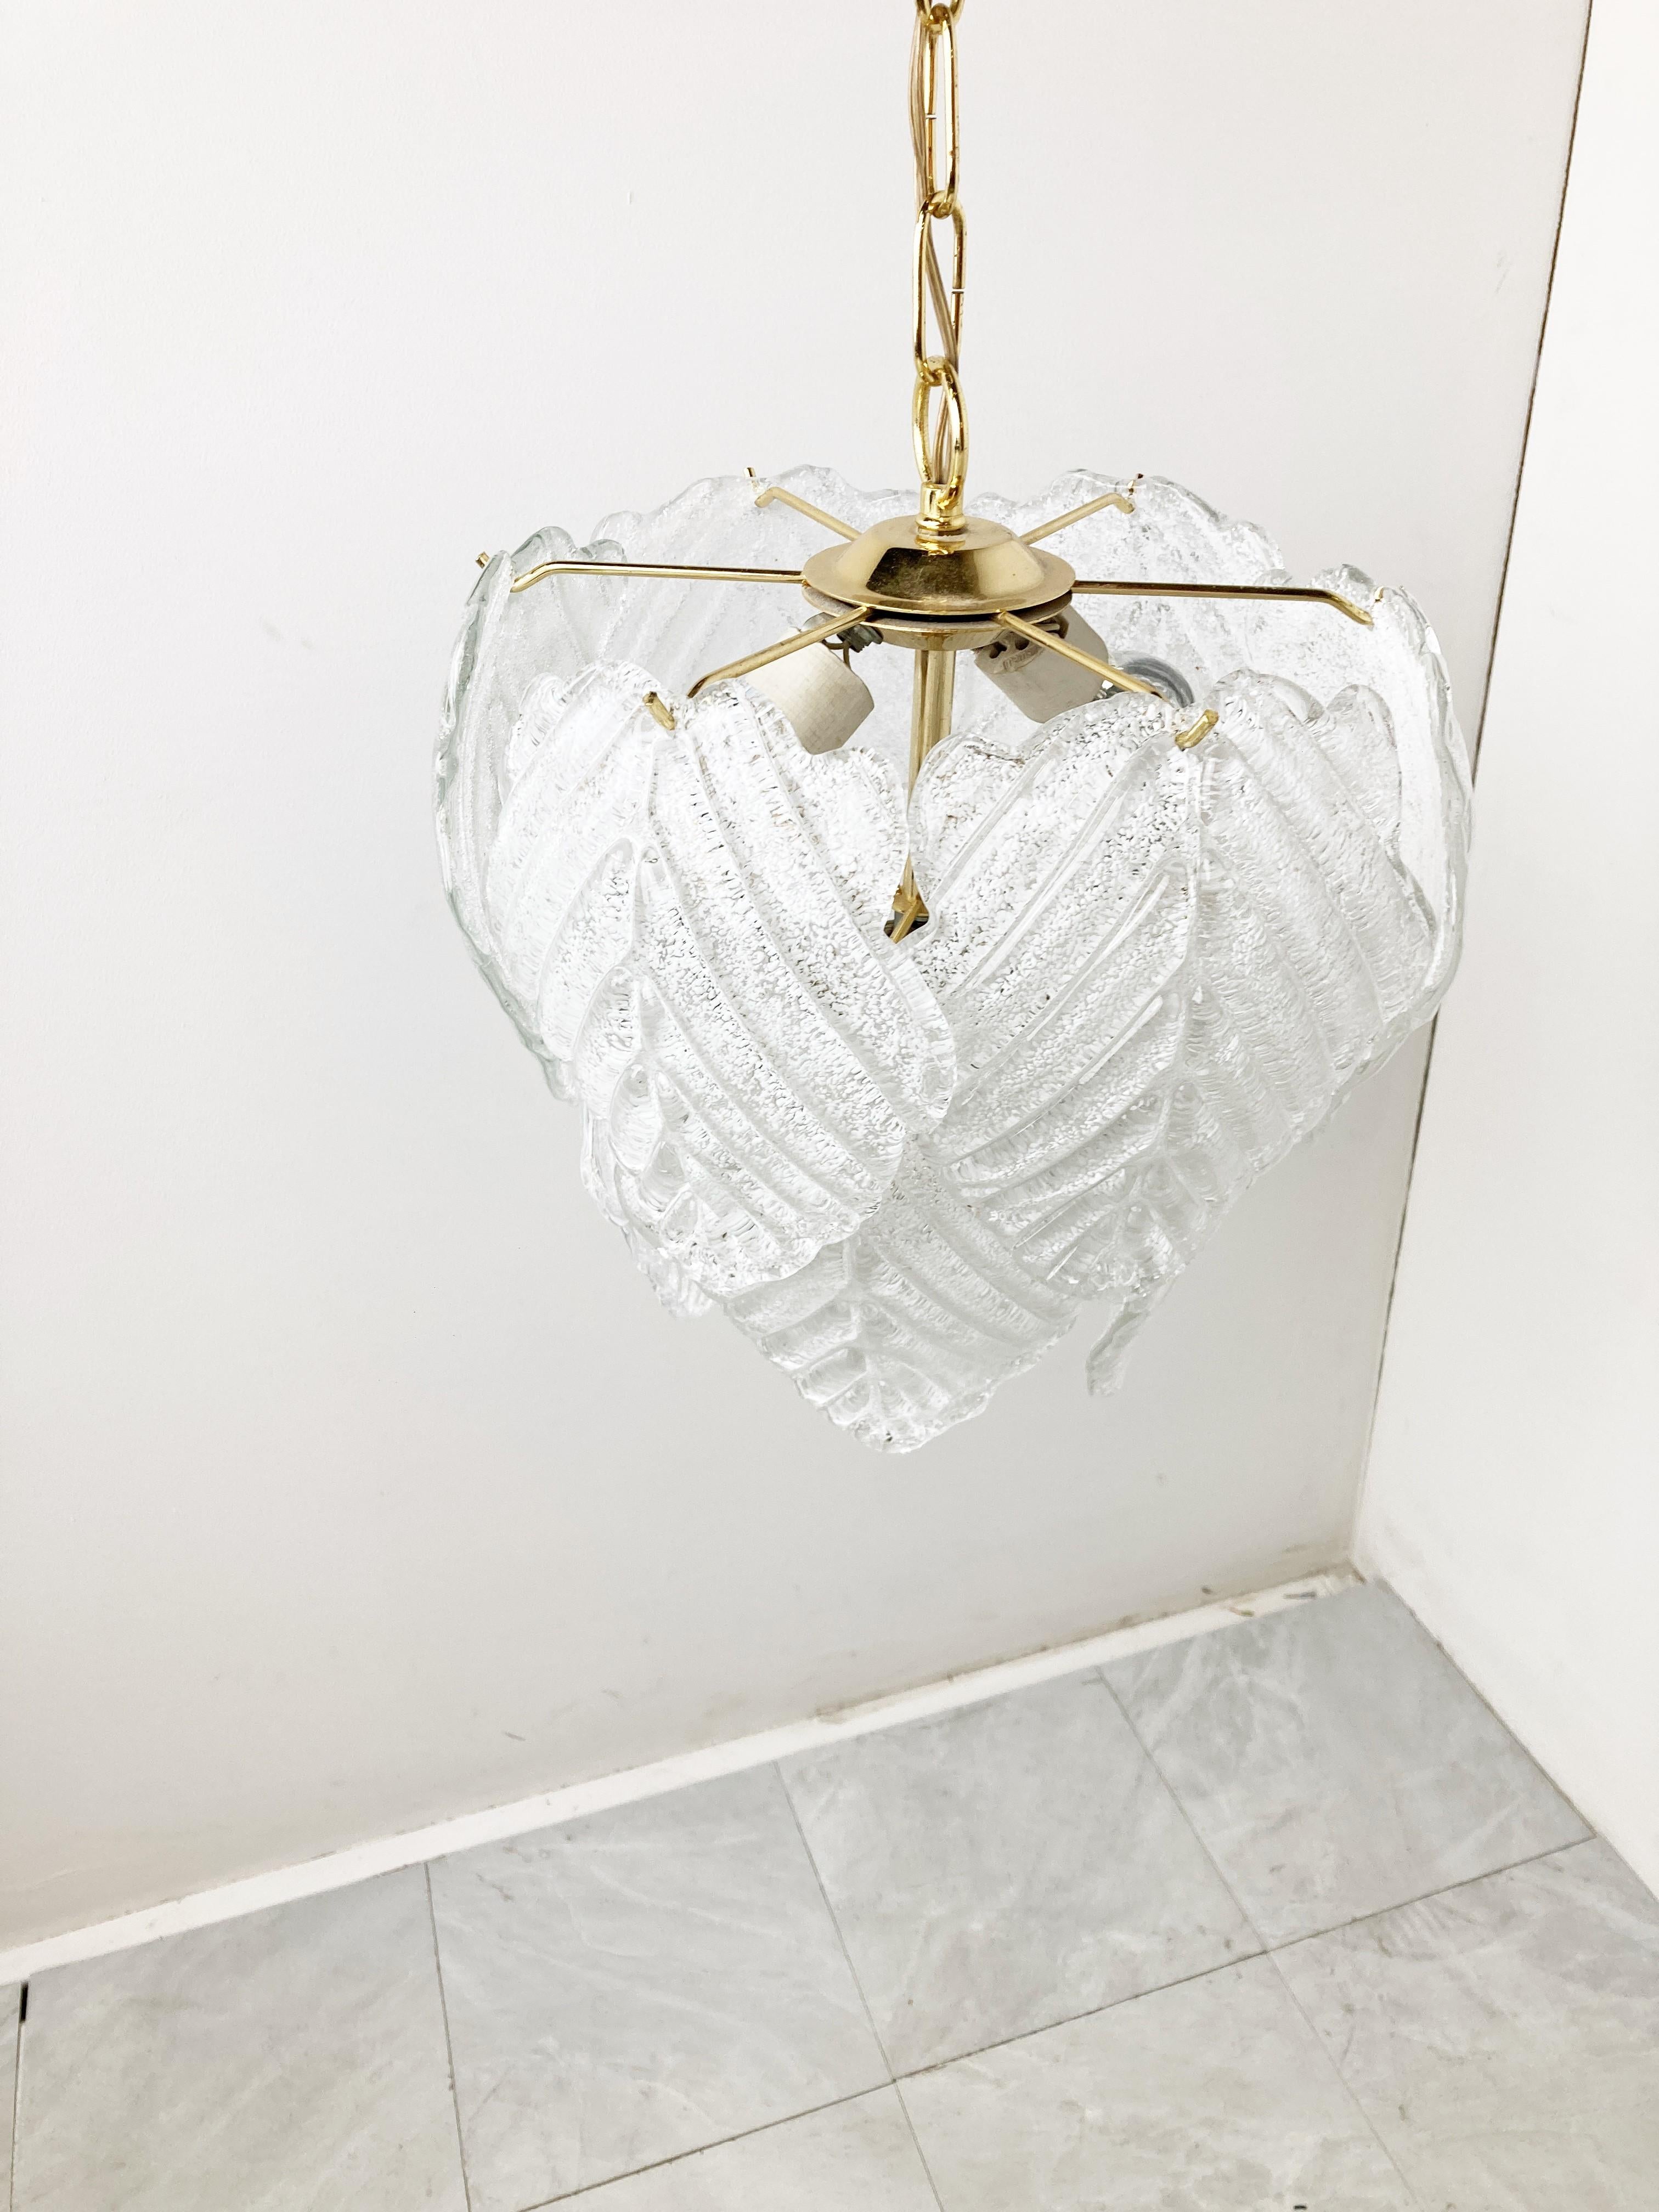 Stunning chandelier with handmade frozen glass murano leaf shaped glasses.

Beautifully crafted and the chandelier emits a stunning light.

Good condition

1970s - Italy

Measures: Height: 90 cm / 35.43